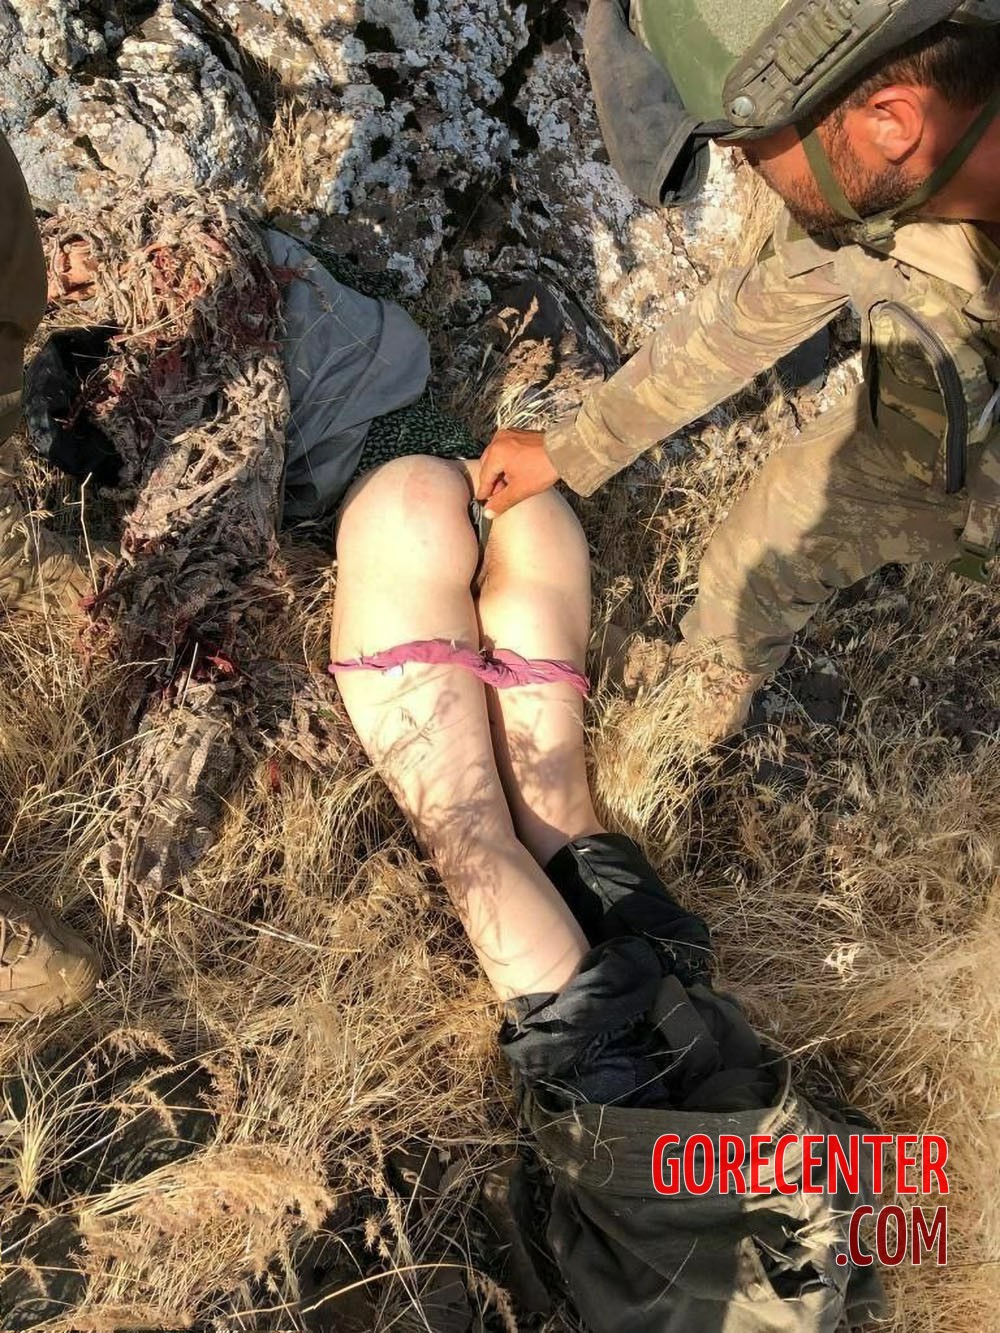 Corpse of female soldier was sexually violated by enemy soldiers.